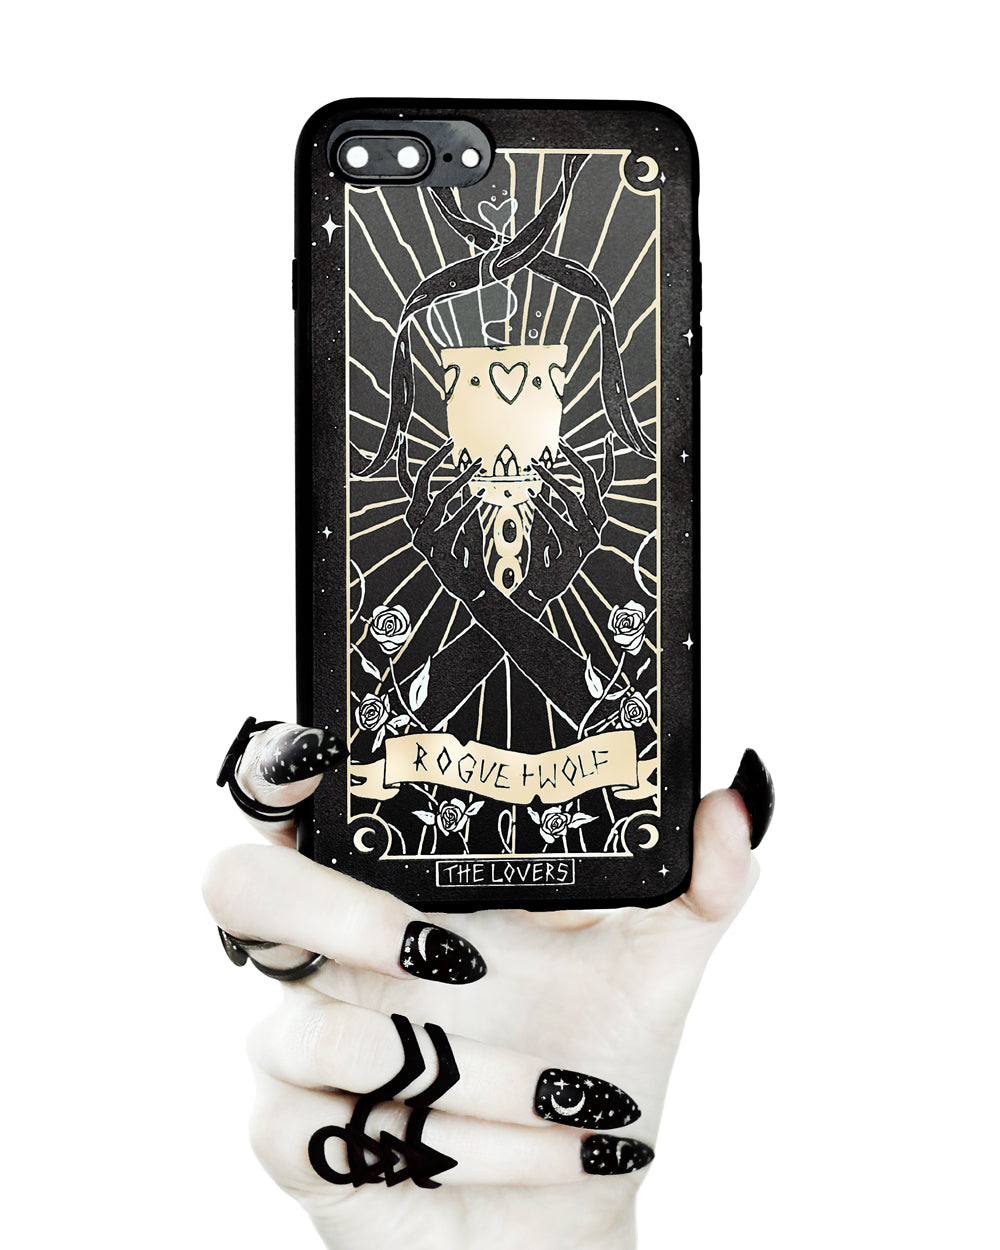 The Lovers Tarot Phone Case - Mirror Gold Details